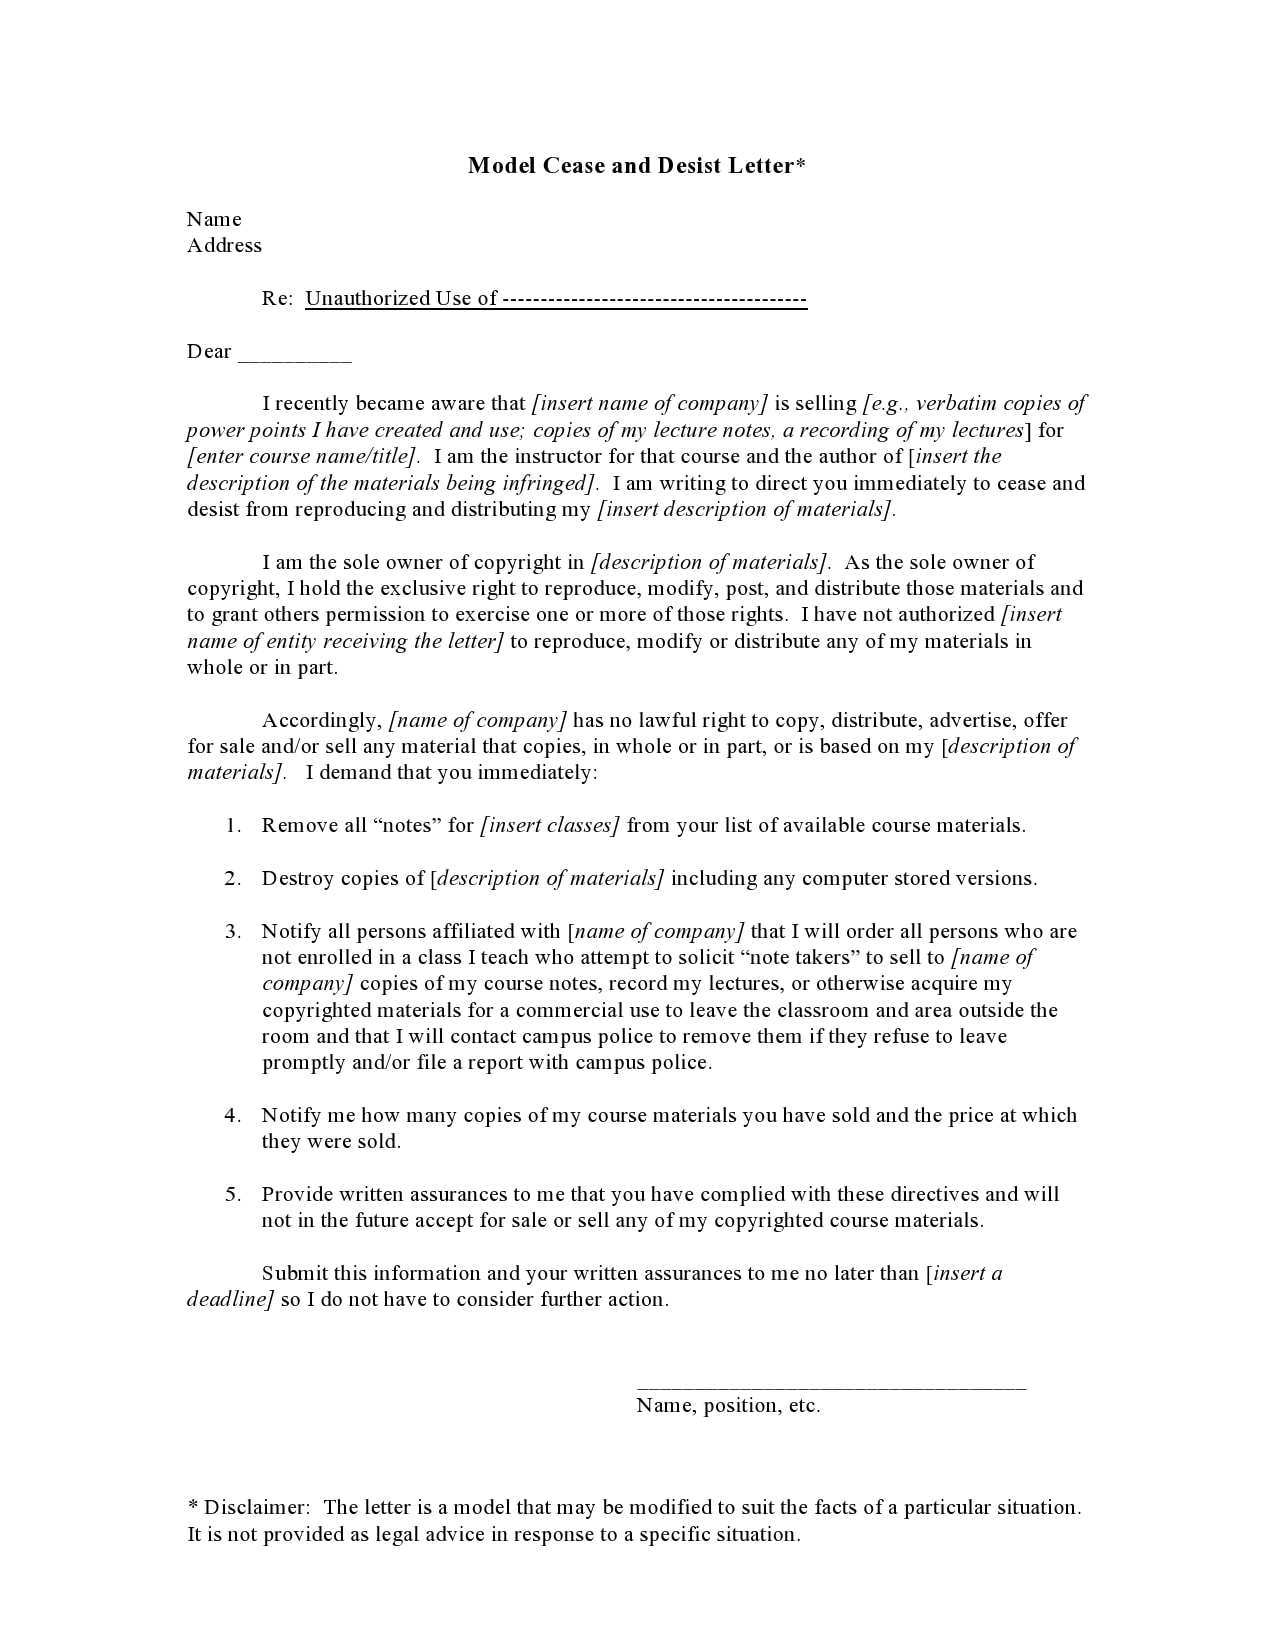 Cease And Desist Letter Copyright Infringement Template from templatearchive.com